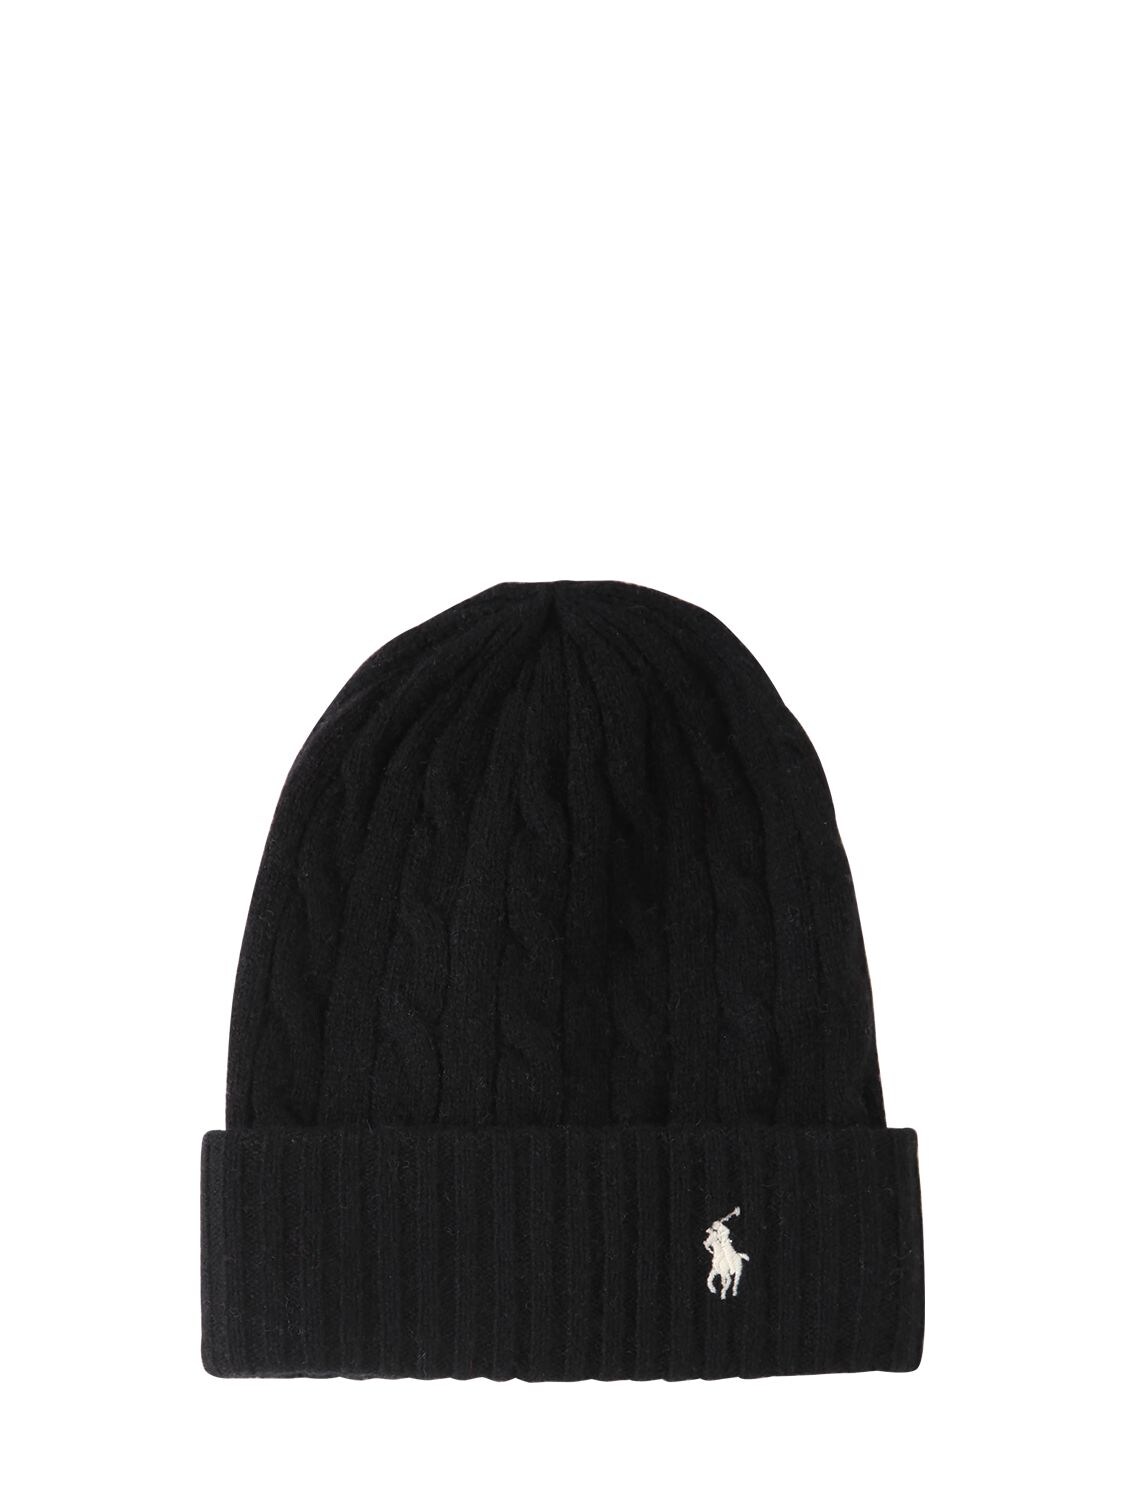 Polo Ralph Lauren Logo Wool & Cashmere Cable Knit Beanie In Black